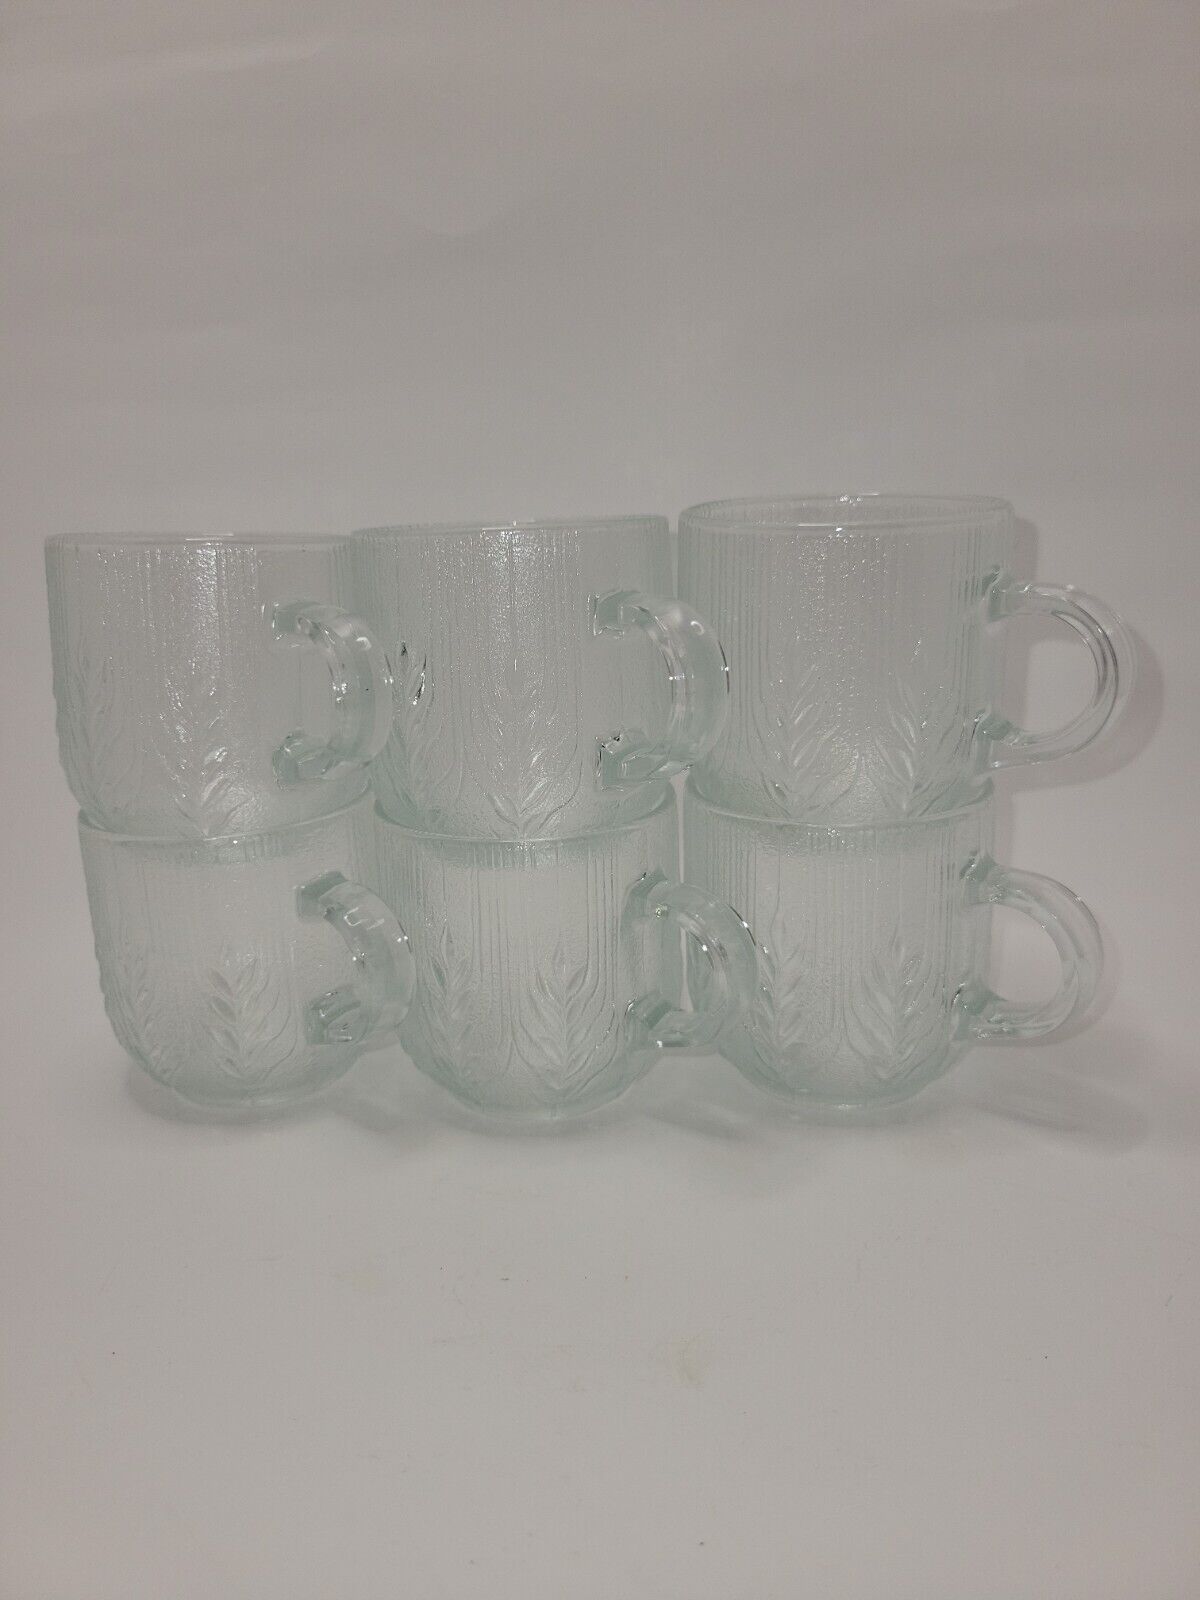 Frosted Arcoroc Country Wheat Punch Bowl Cups/Coffee Cup Set Of 6 Vintage USA